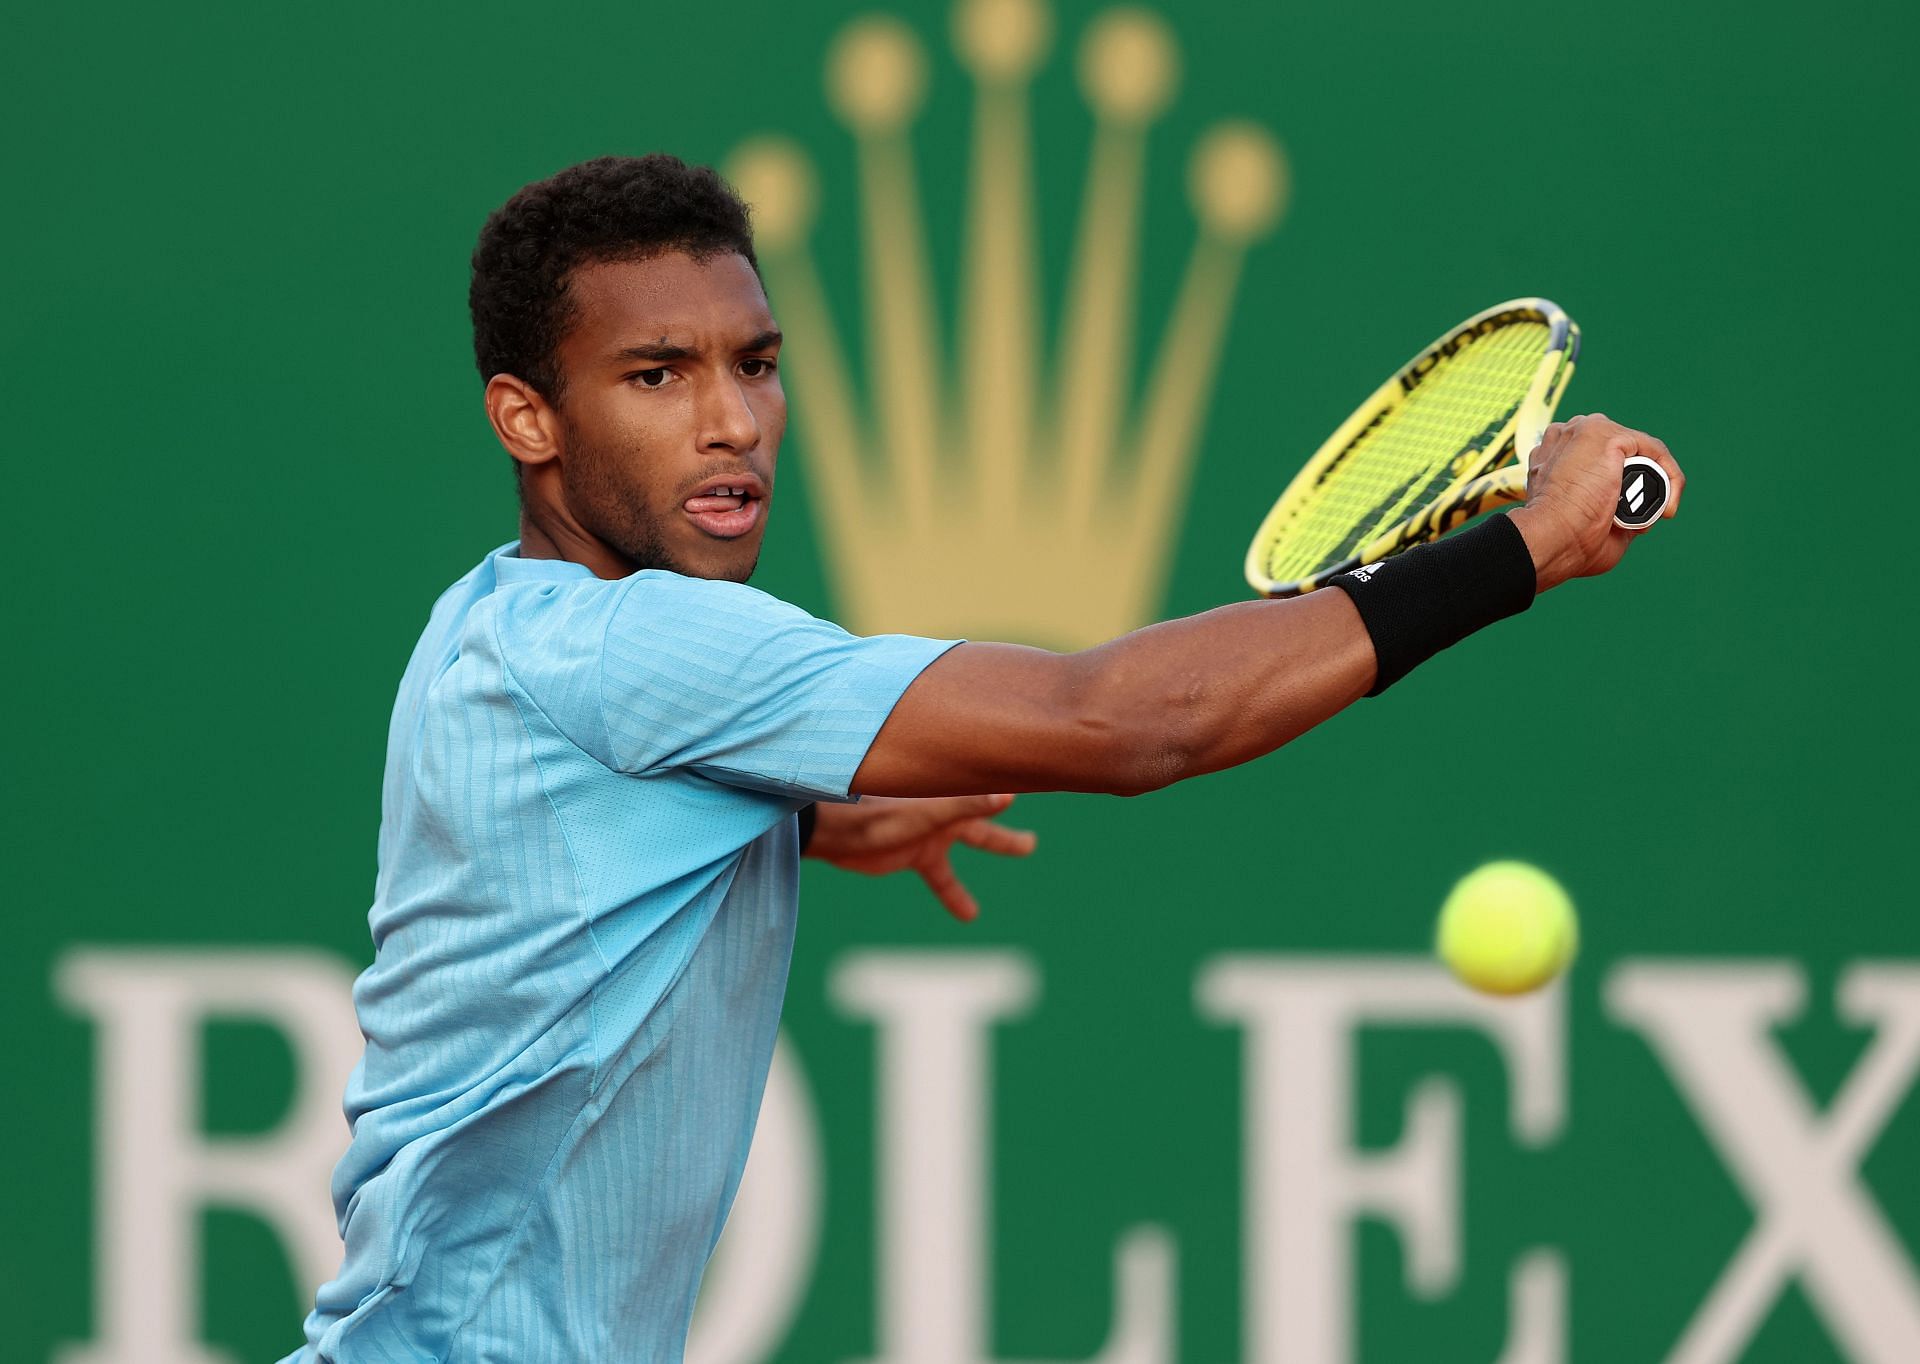 Felix Auger-Aliassime is the third seed at the Barcelona Open